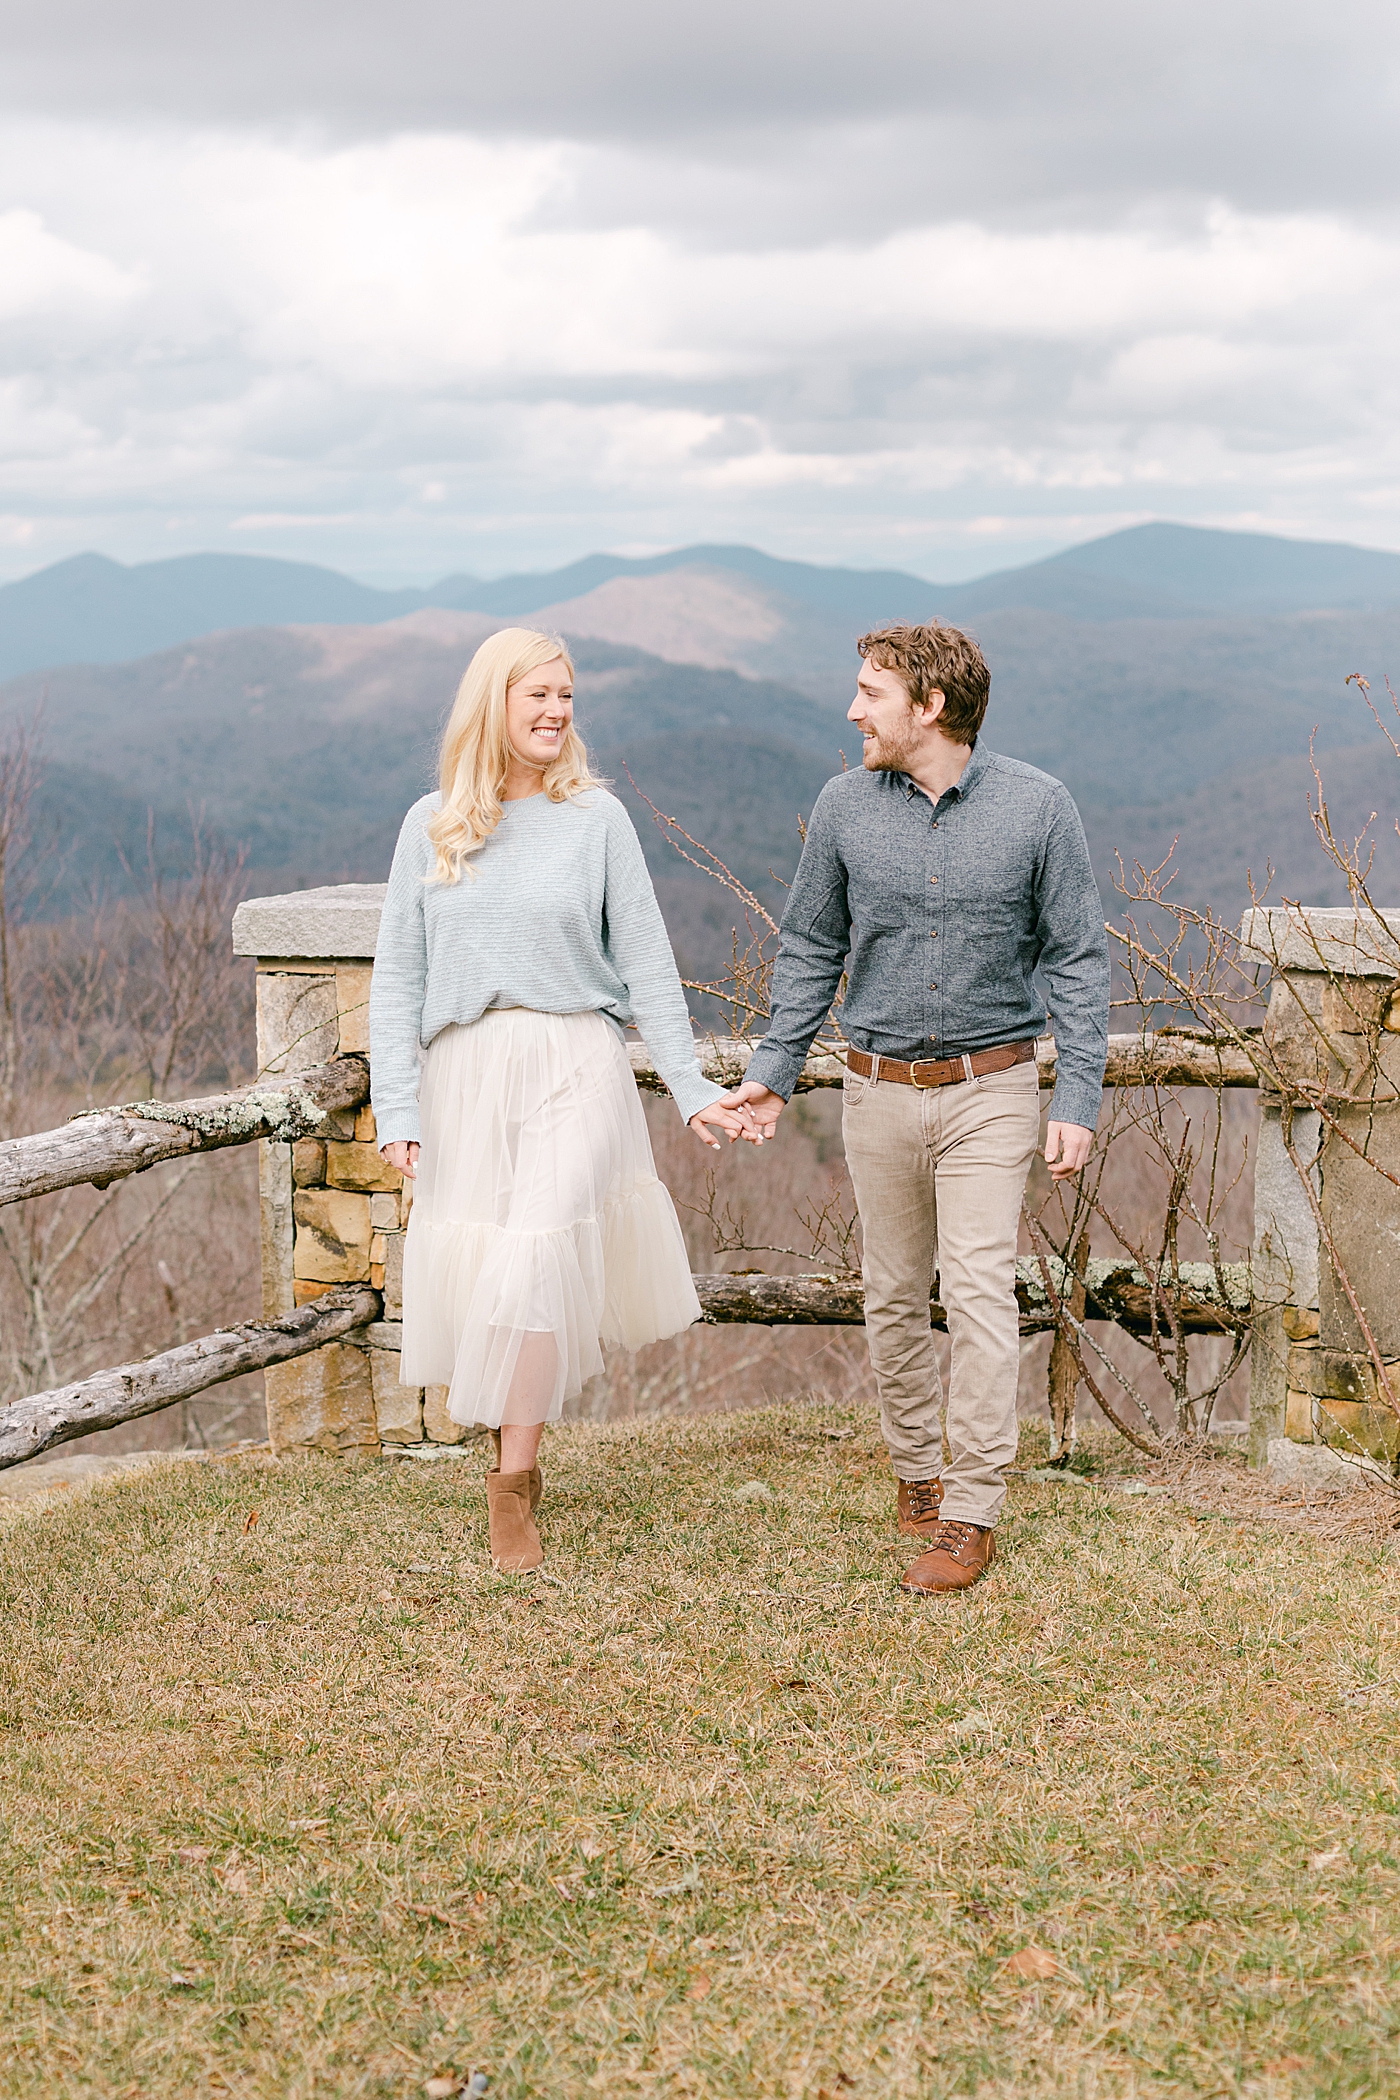 Couple holding hands walking in the mountains | Image by Hope Helmuth Photography